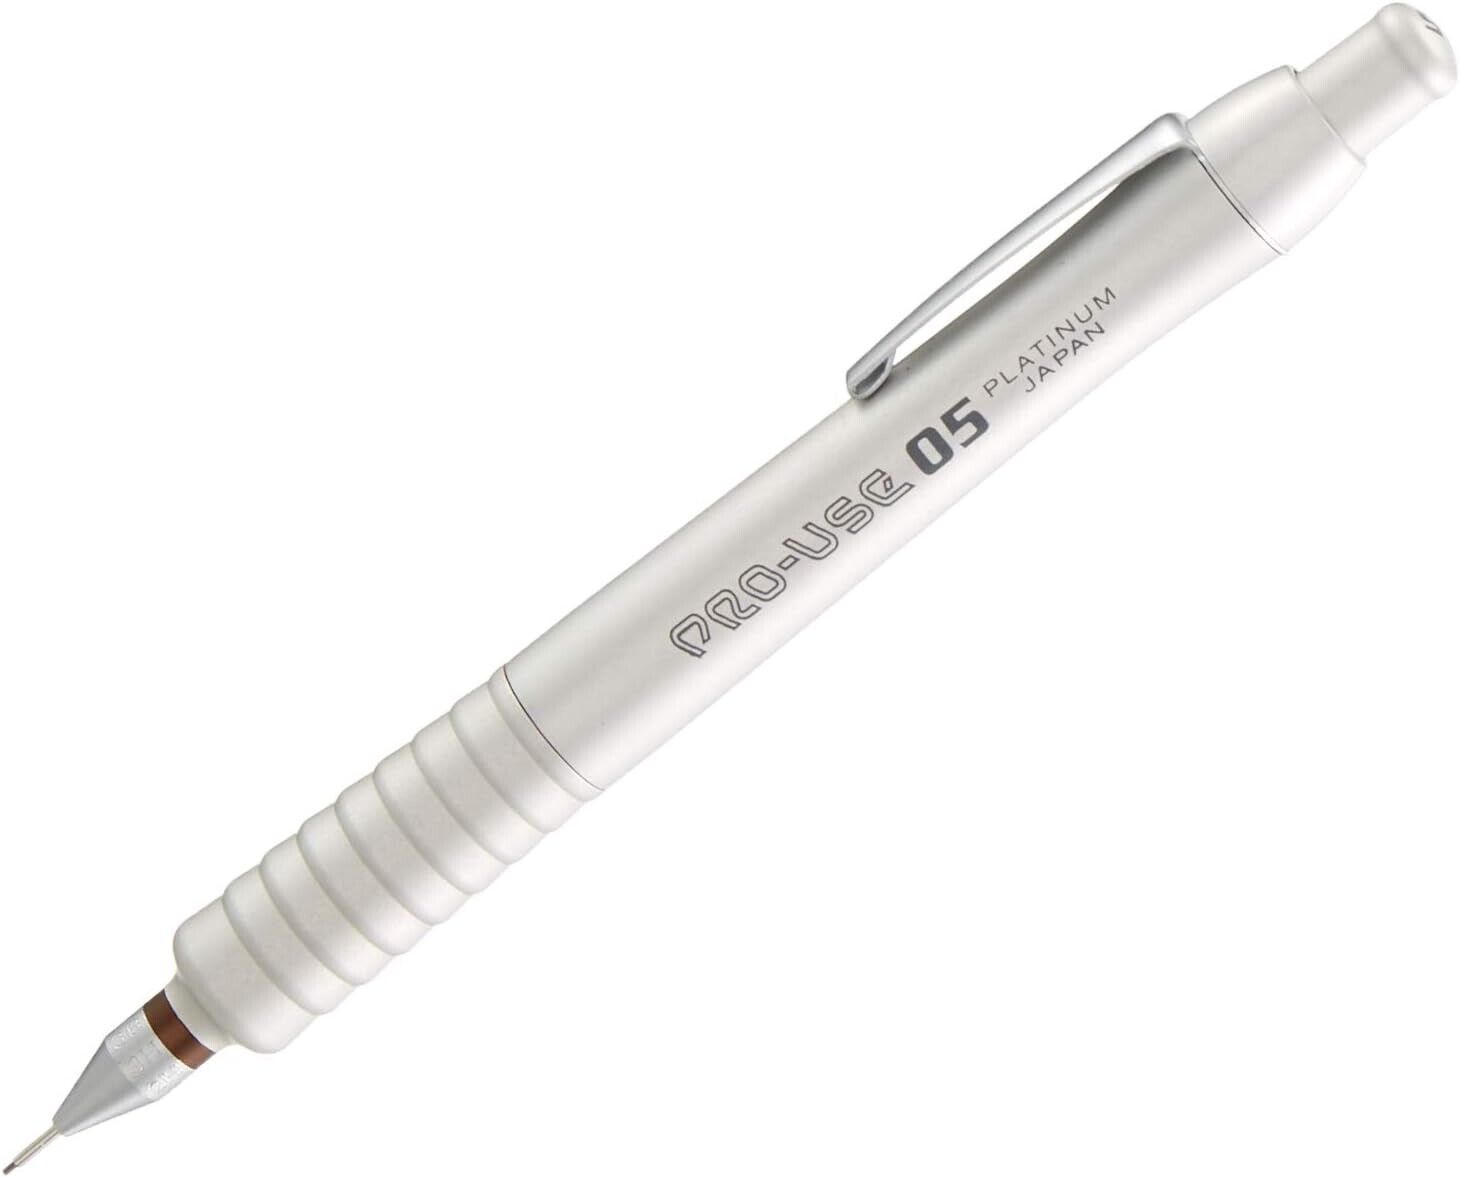 Platinum Pro Use Msd 1500B Pro Use pencil  0.5 mm made in japan